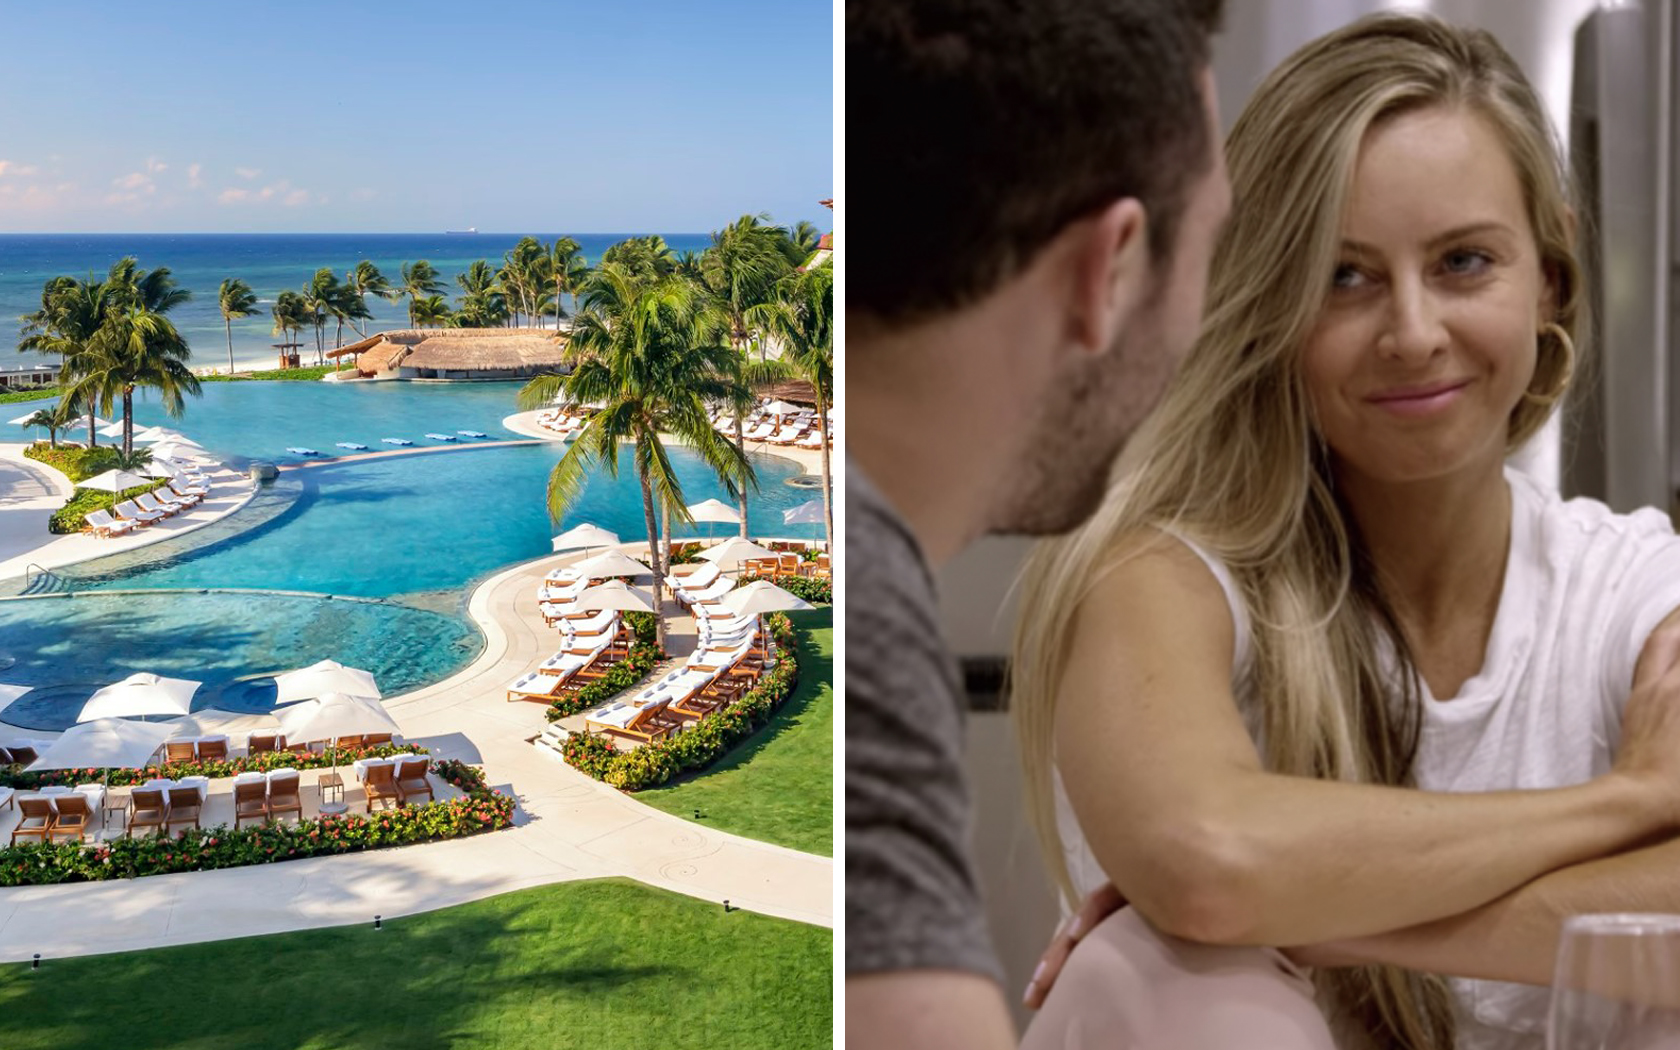 Love Is Blind: You Can Stay At The Mexican Resort From Netflix's Show